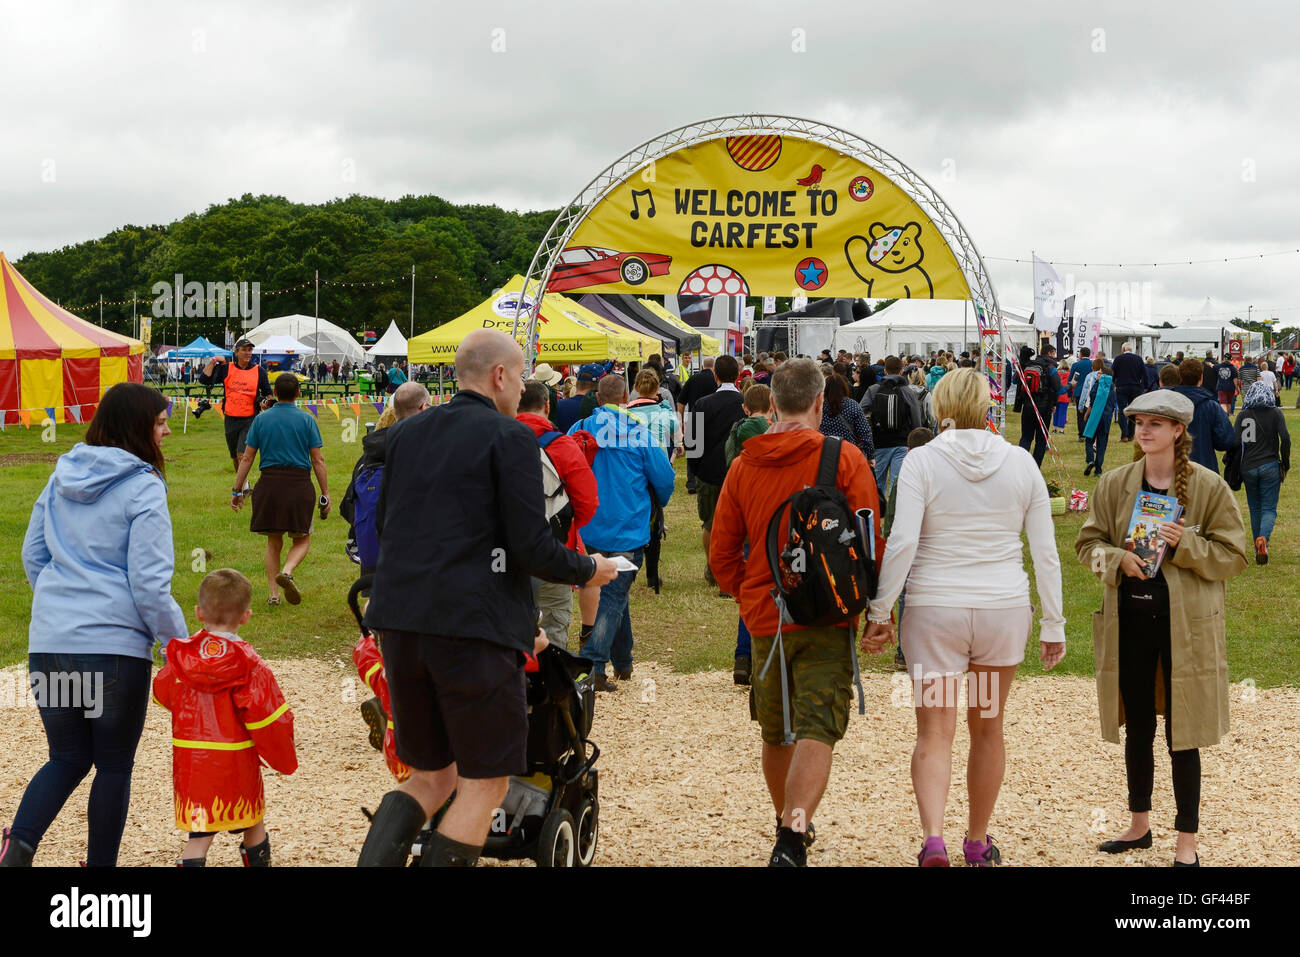 Carfest North, Bolesworth, Cheshire, UK. 29th July, 2016. People making their way in. The event is the brainchild of Chris Evans and features 3 days of cars, music and entertainment with profits being donated to the charity Children in Need. Credit:  Andrew Paterson/Alamy Live News Stock Photo